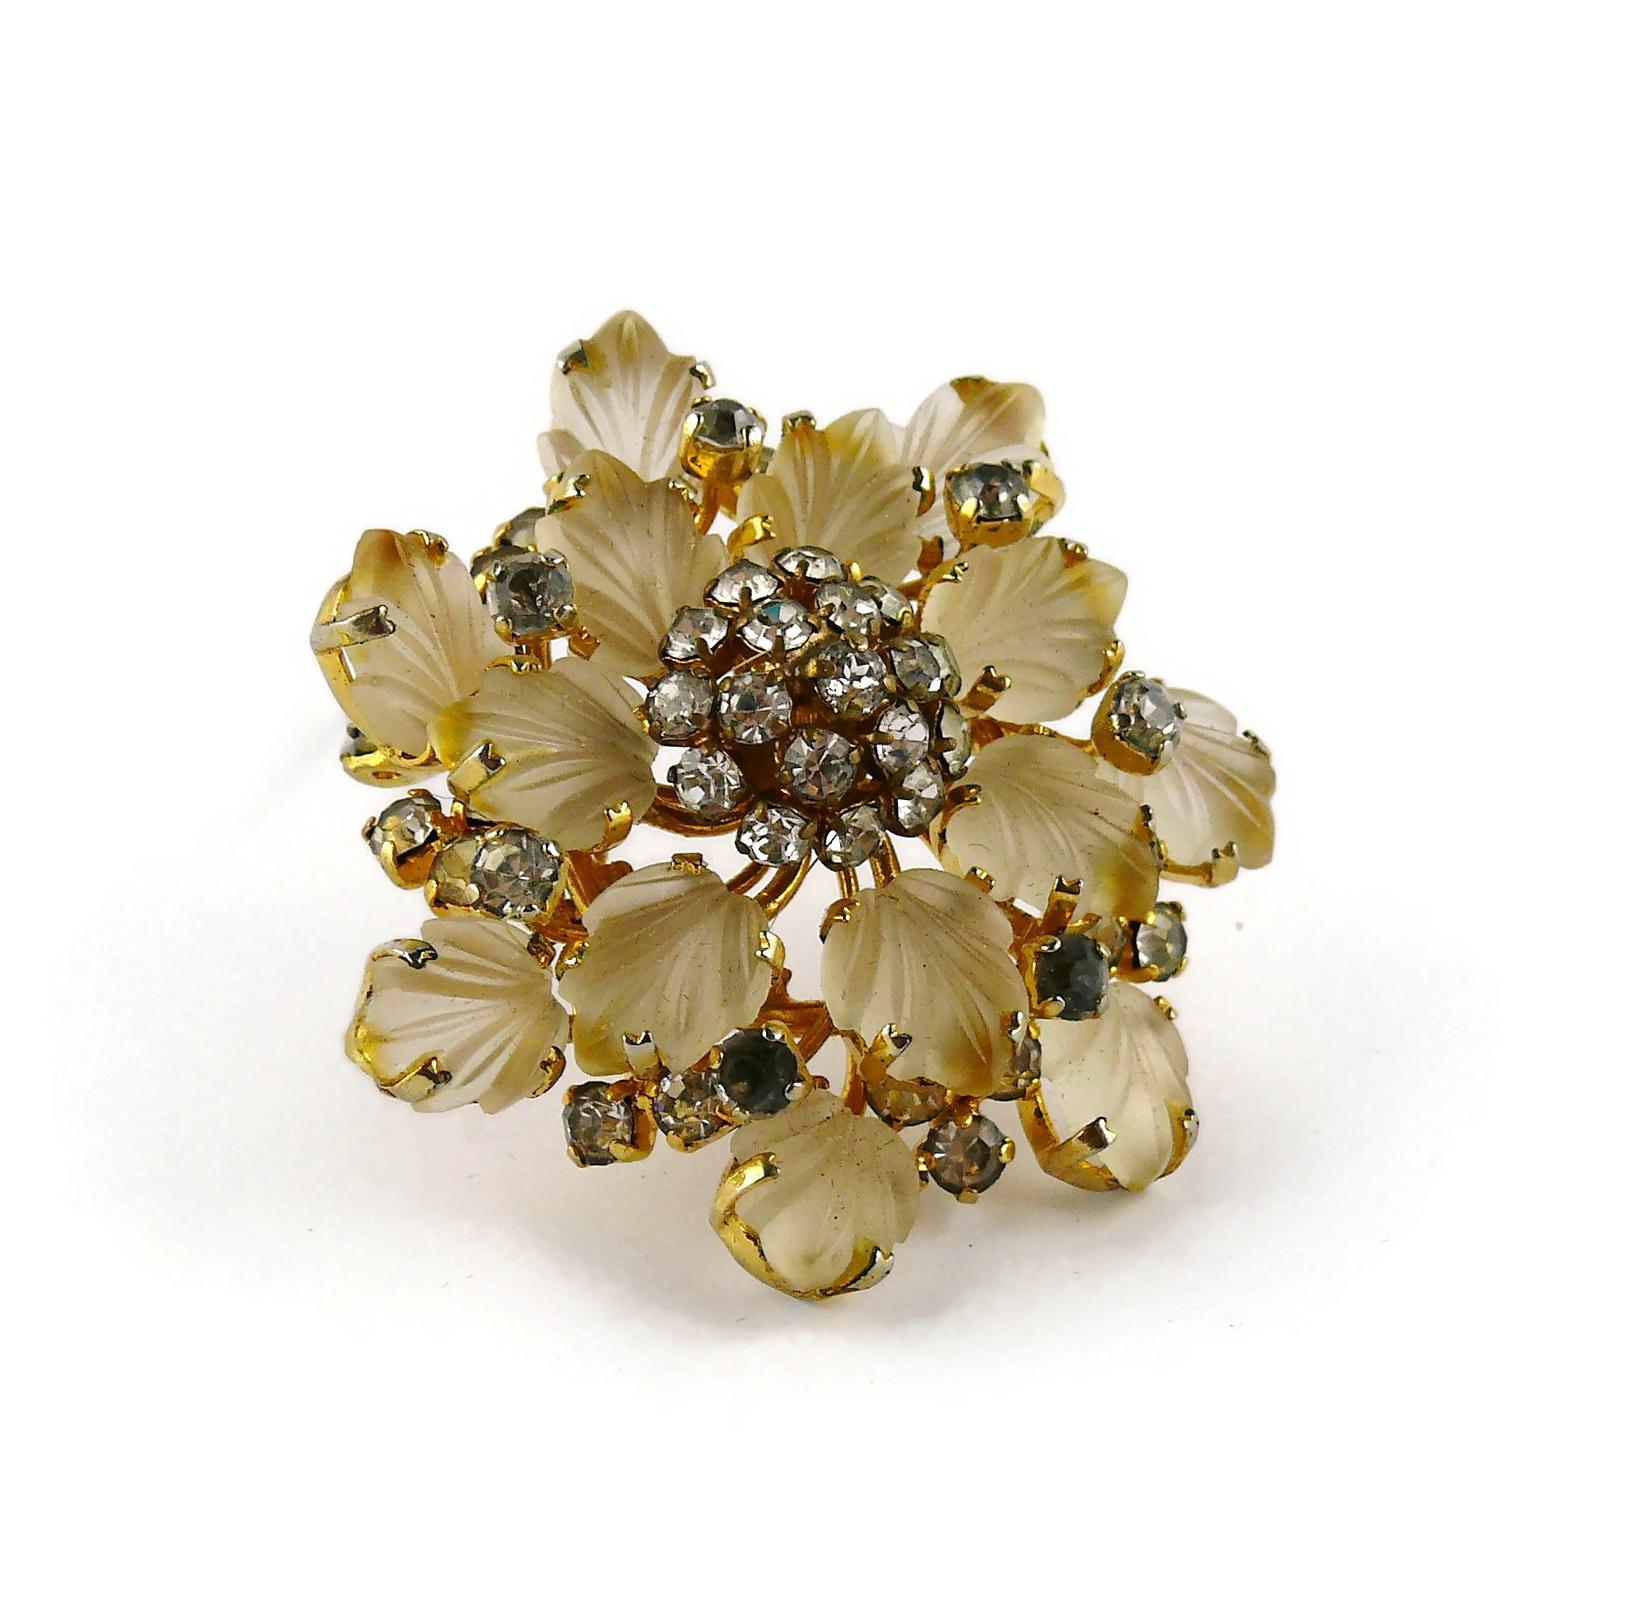 CHRISTIAN DIOR vintage 1972 gold toned 3D metal brooch featuring a flower embellished with frosted glass petals and clear crystals.

Marked CHR. DIOR 1972.
Germany.

Indicative measurements : max. 4.6 cm x 4.6 cm (1.81 inches x 1.81